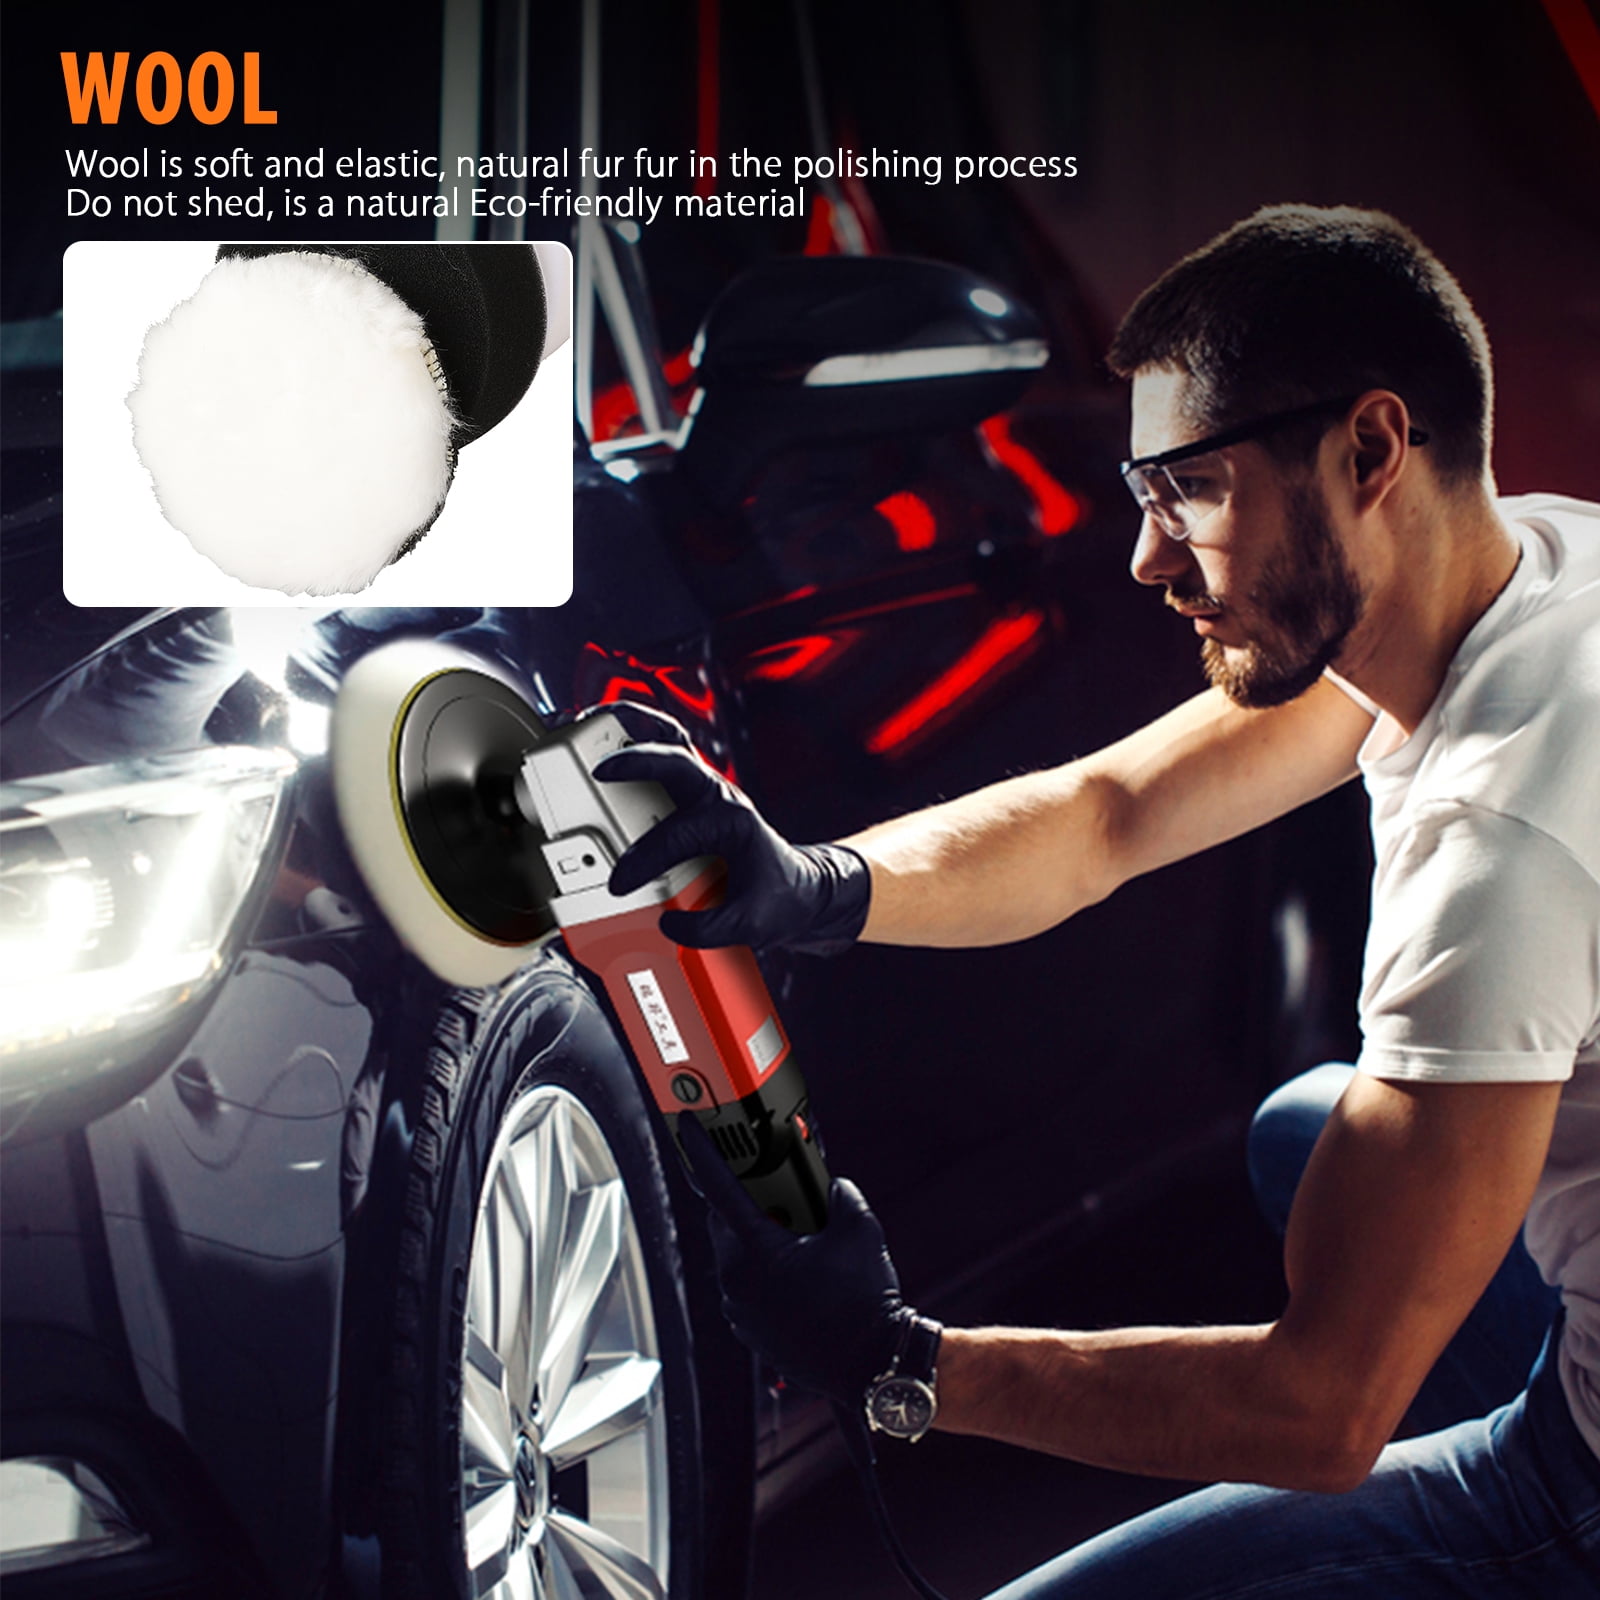 New Car Polishing Kit Self Adhesive Buffing Waxing Sponge Wool Wheel Polish  Pad For Car Polisher Drill Adapter Detail Cleaning From Xselectronics,  $6.07